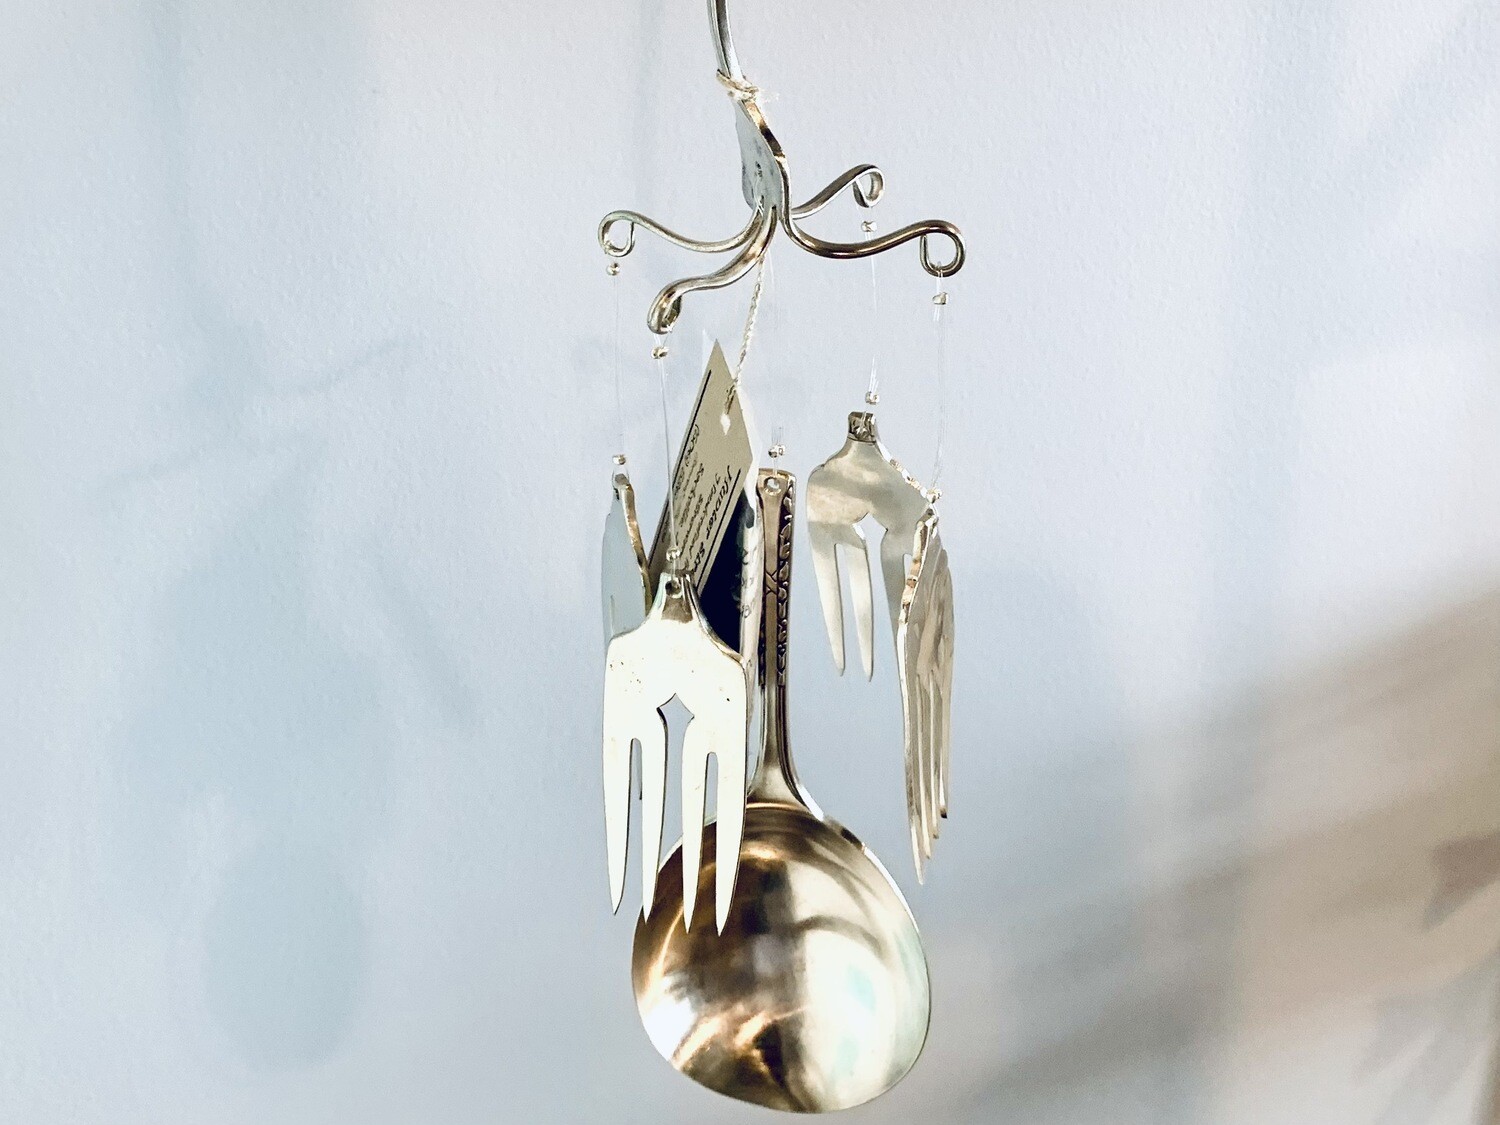 Forks & Spoon Chimes